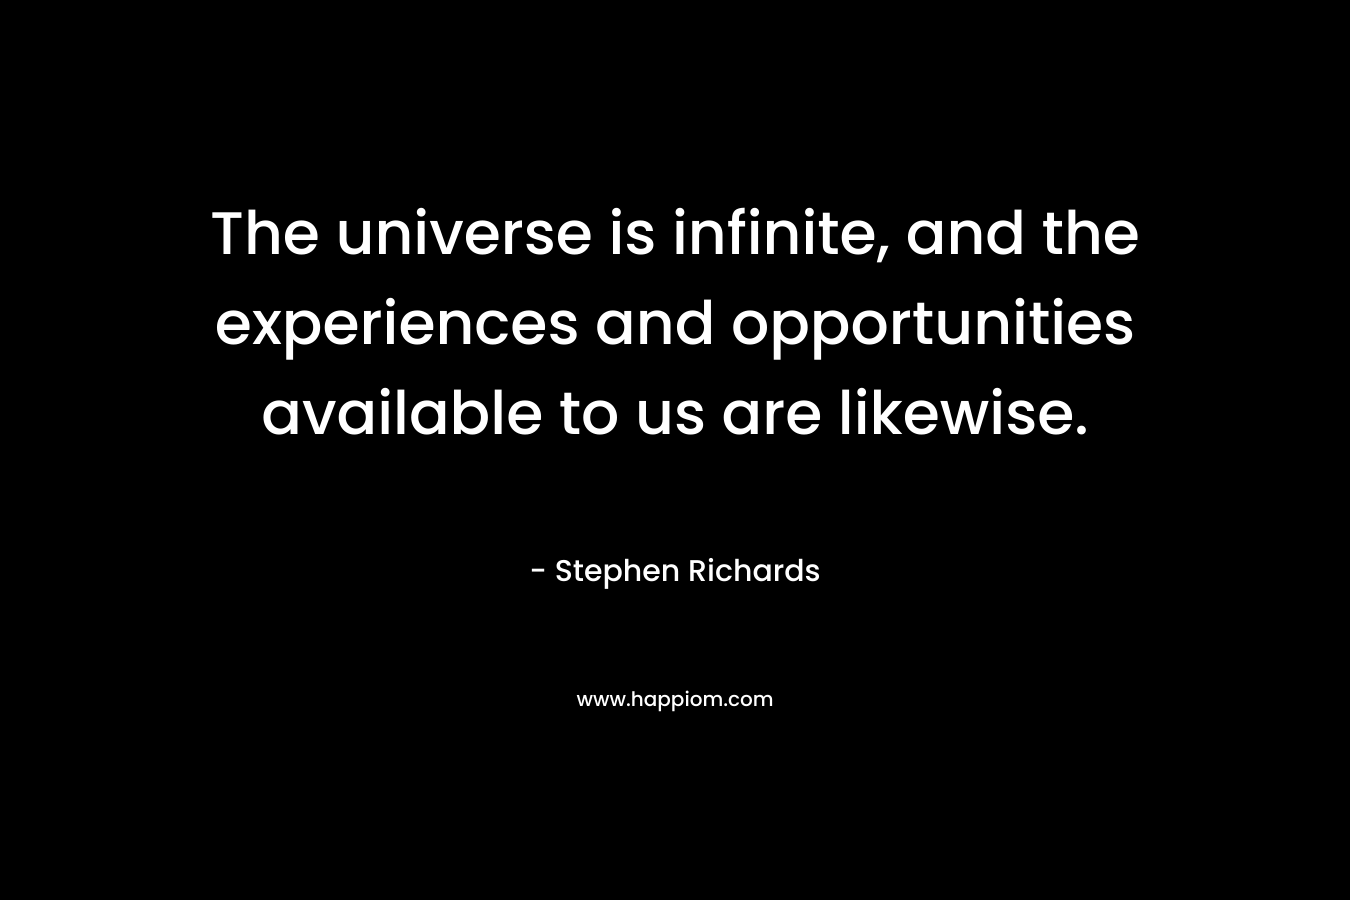 The universe is infinite, and the experiences and opportunities available to us are likewise. – Stephen Richards